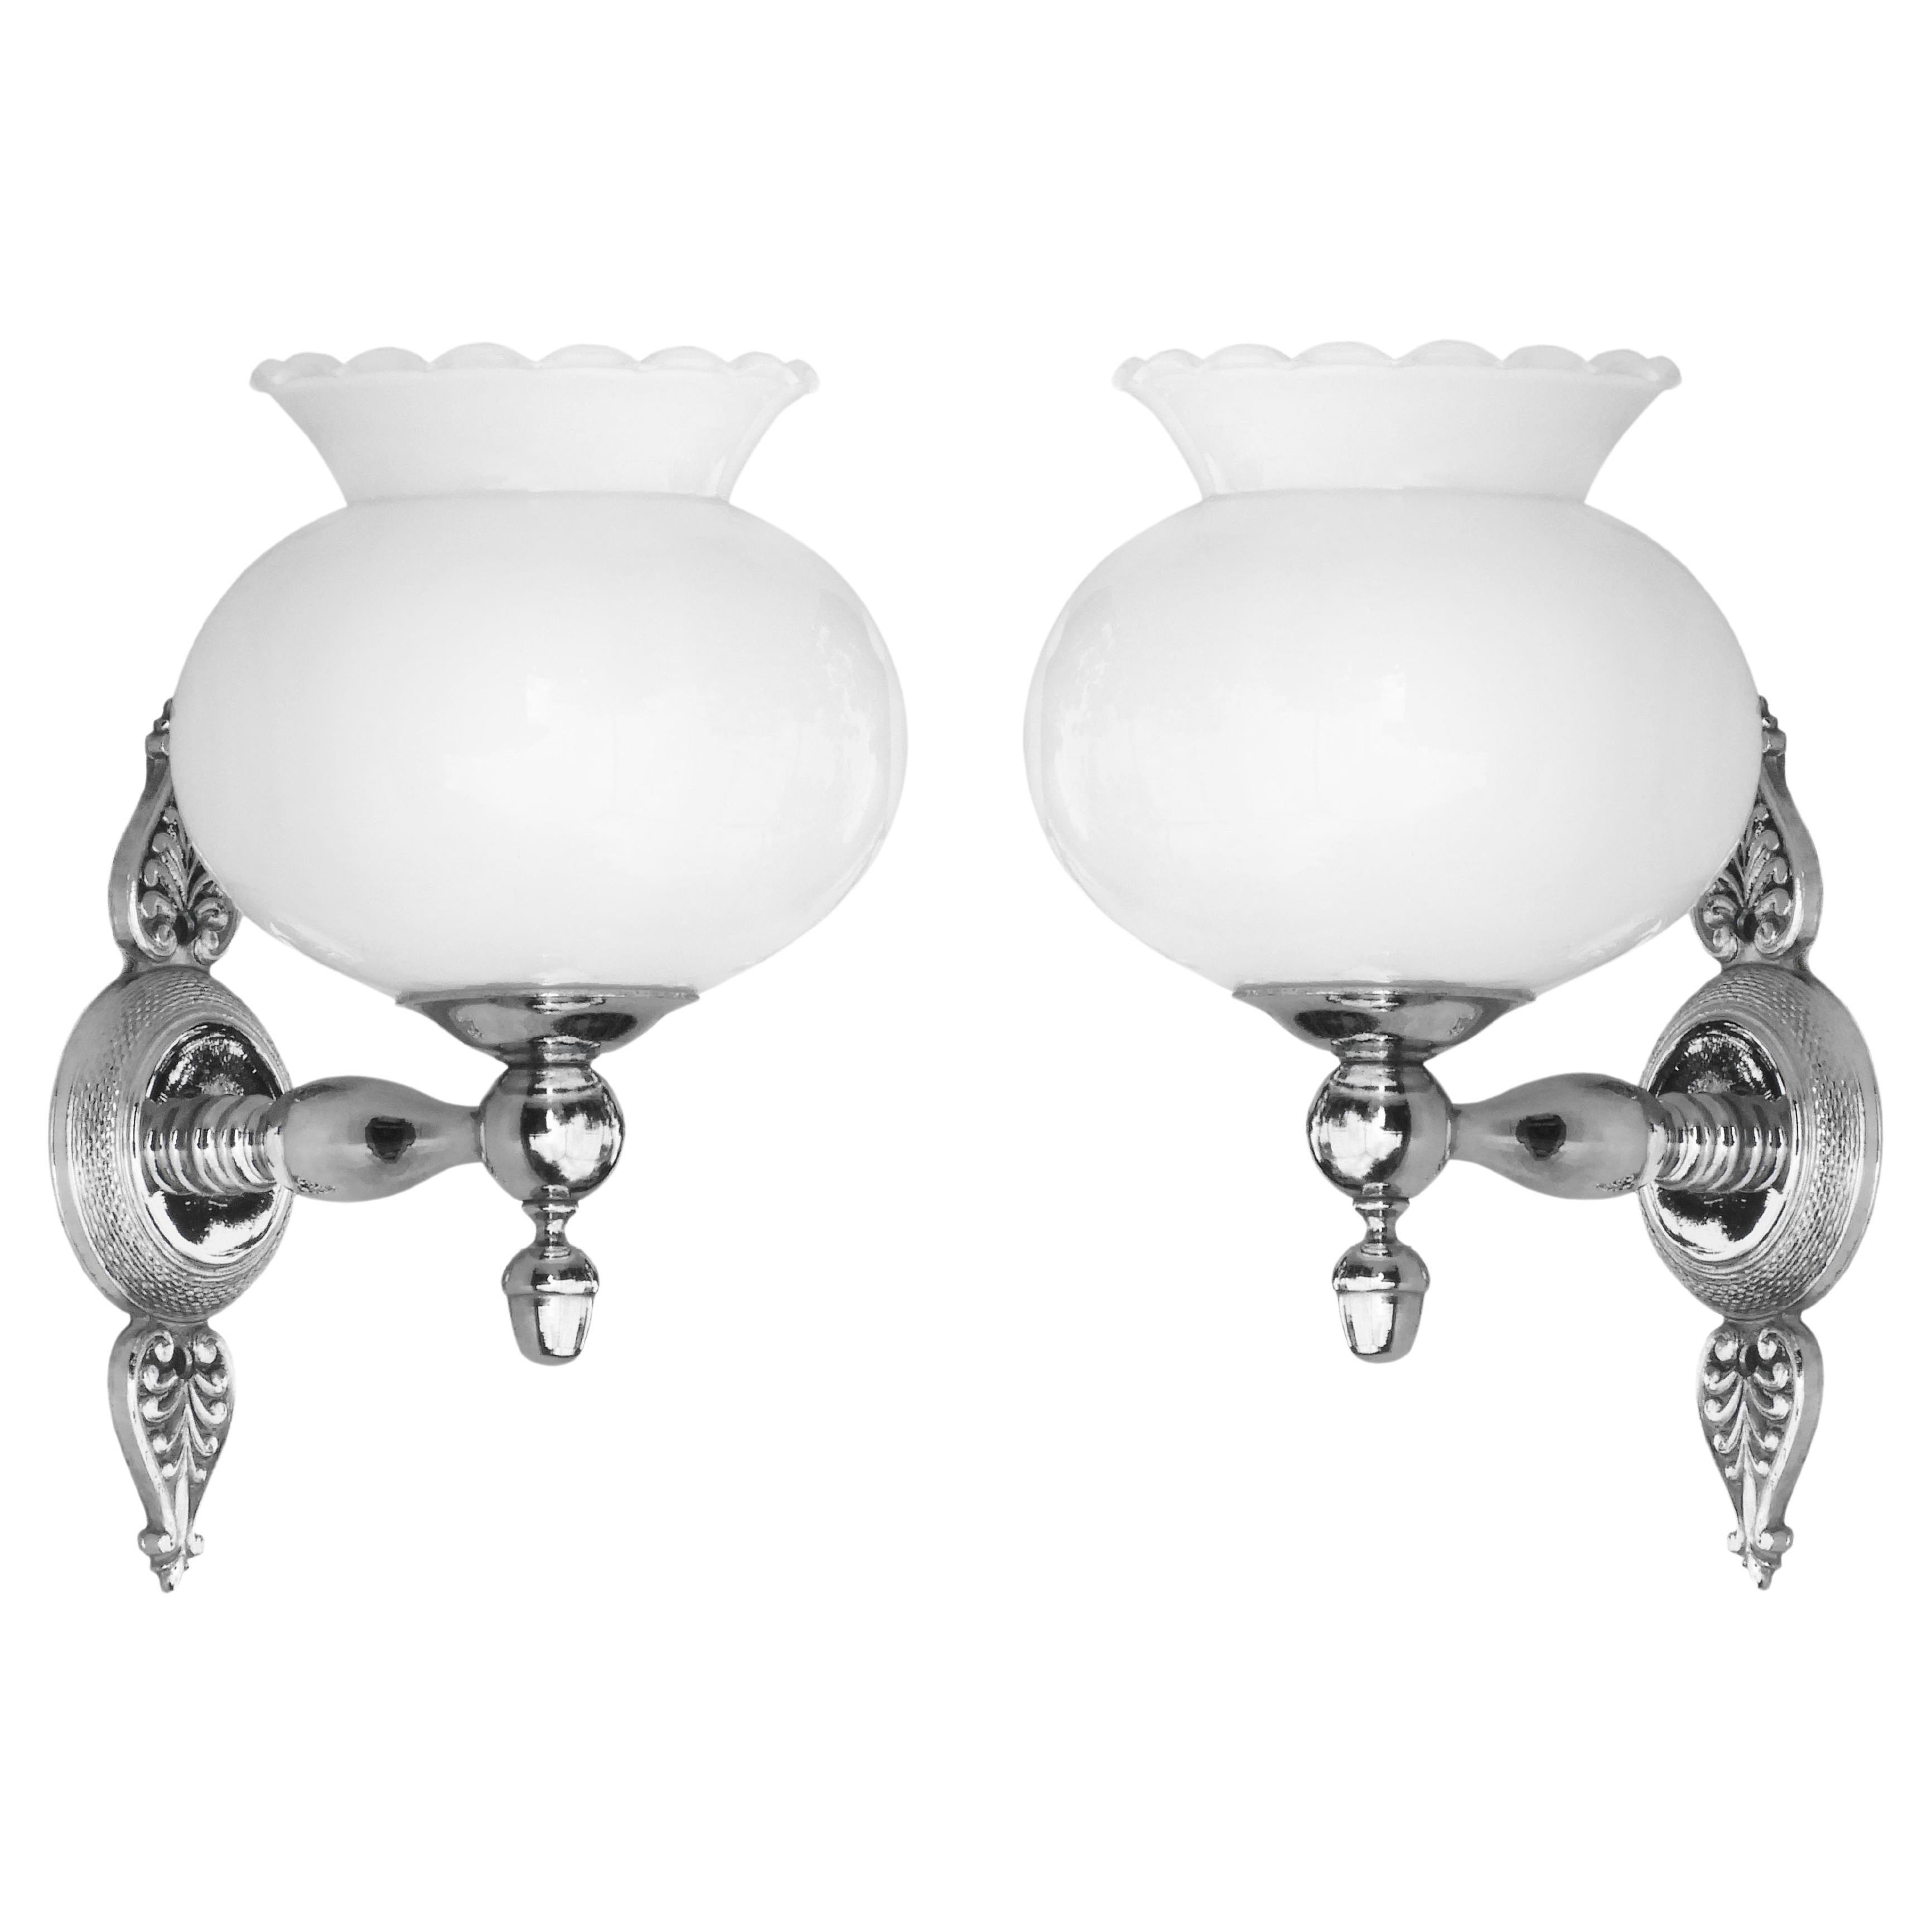 French Empire Revival Wall Light Sconces in Opaline and Chrome, circa 1970 For Sale